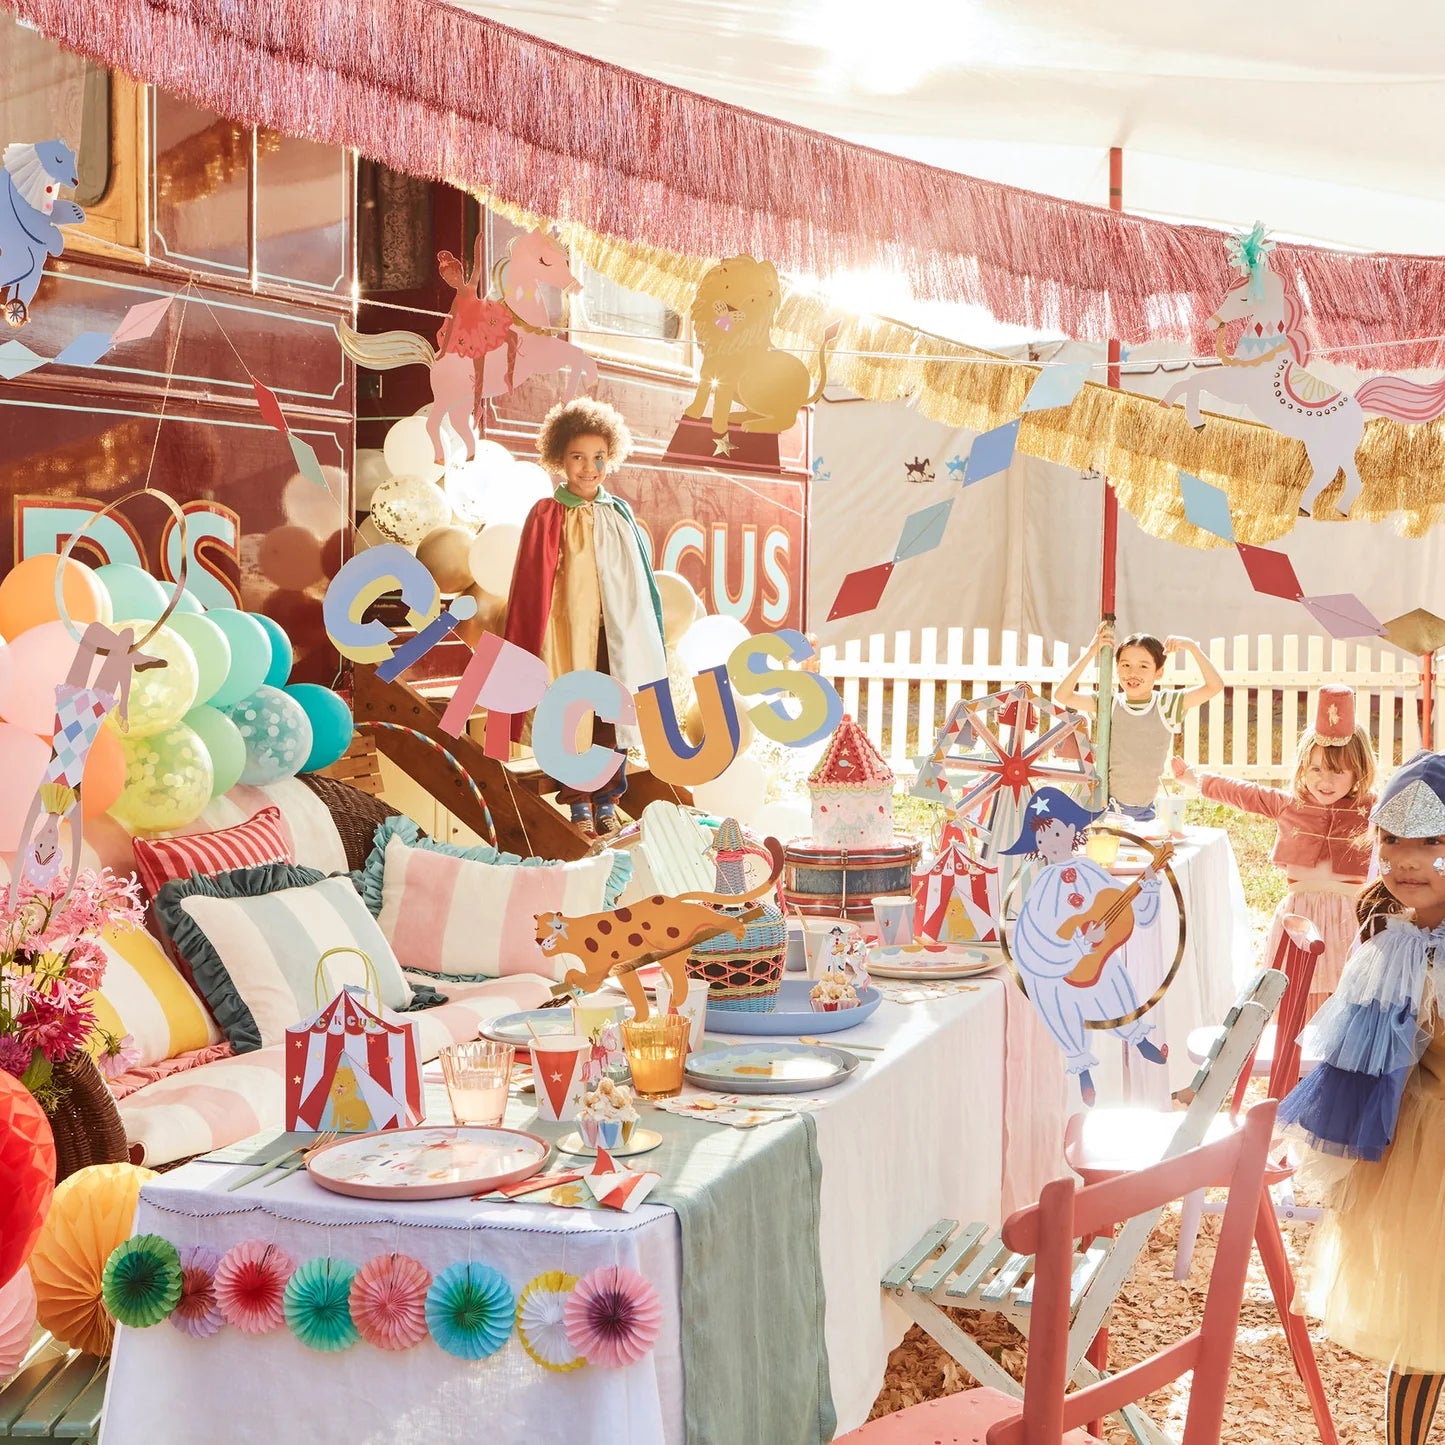 circuses - Edie & Eve - Children's Party Supplies, Toys & Gifts